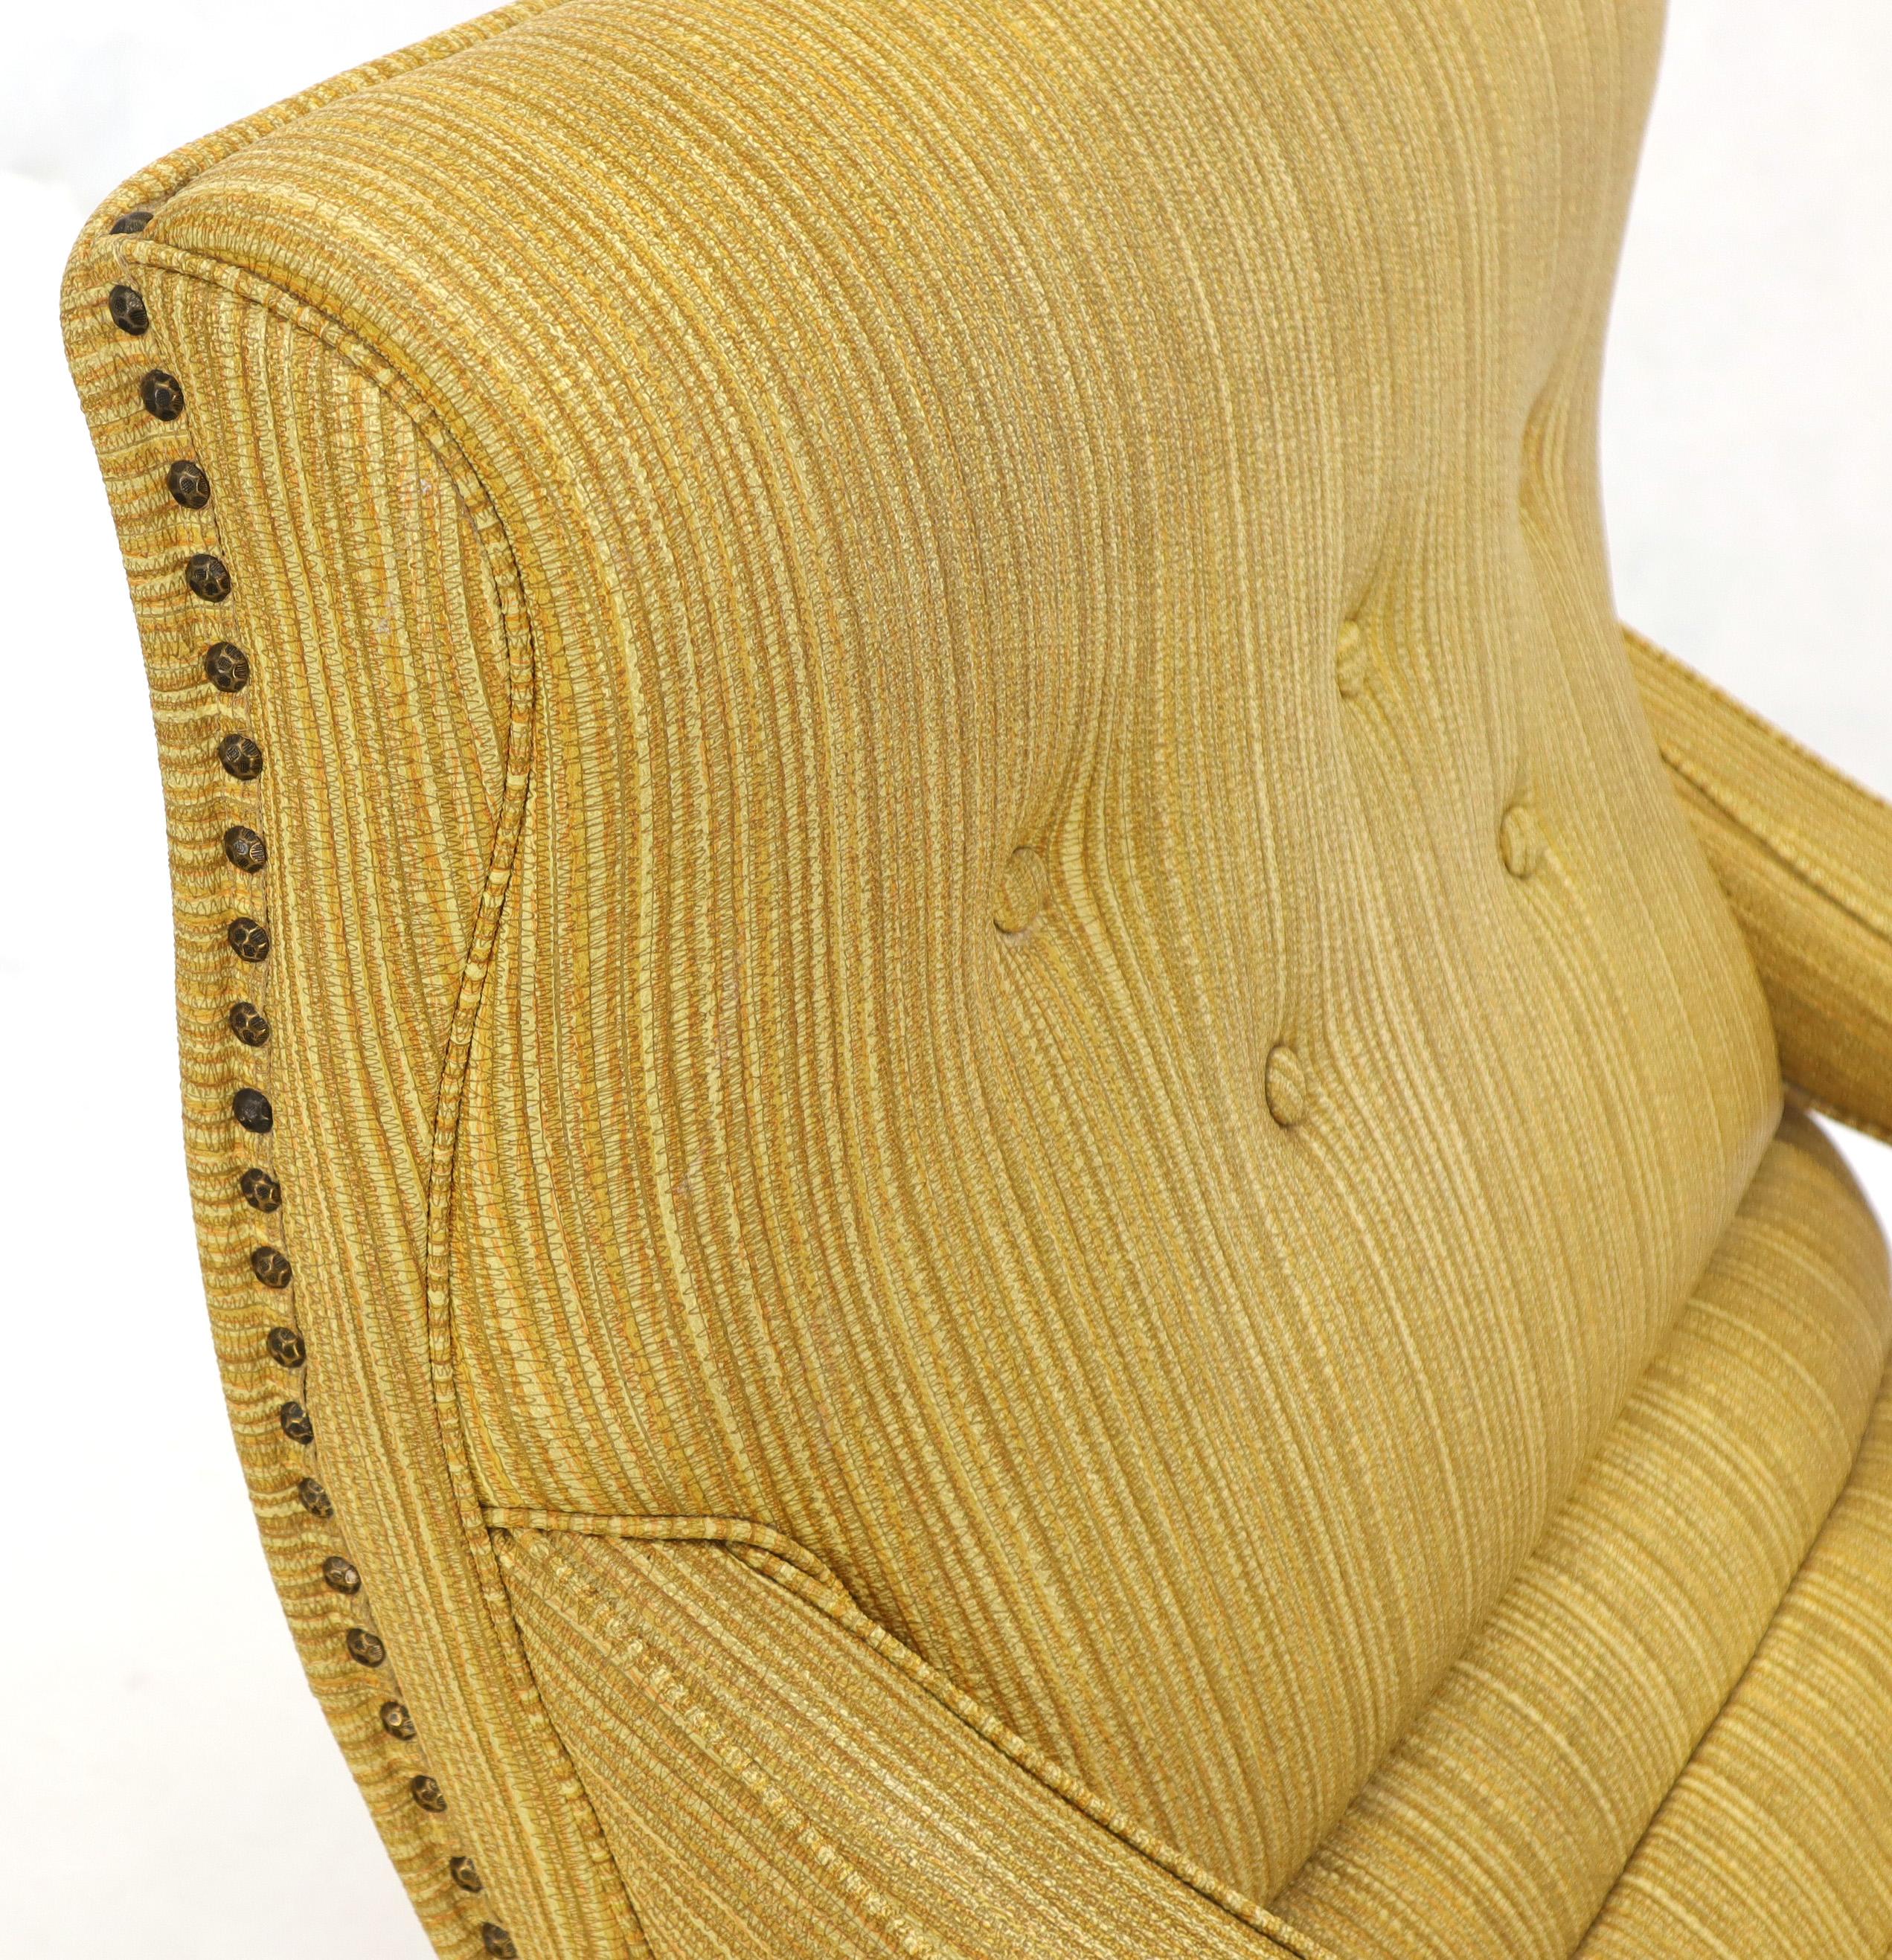 Yellow Upholstery Super Clean Original Condition Adjustable Lounge Chair 4